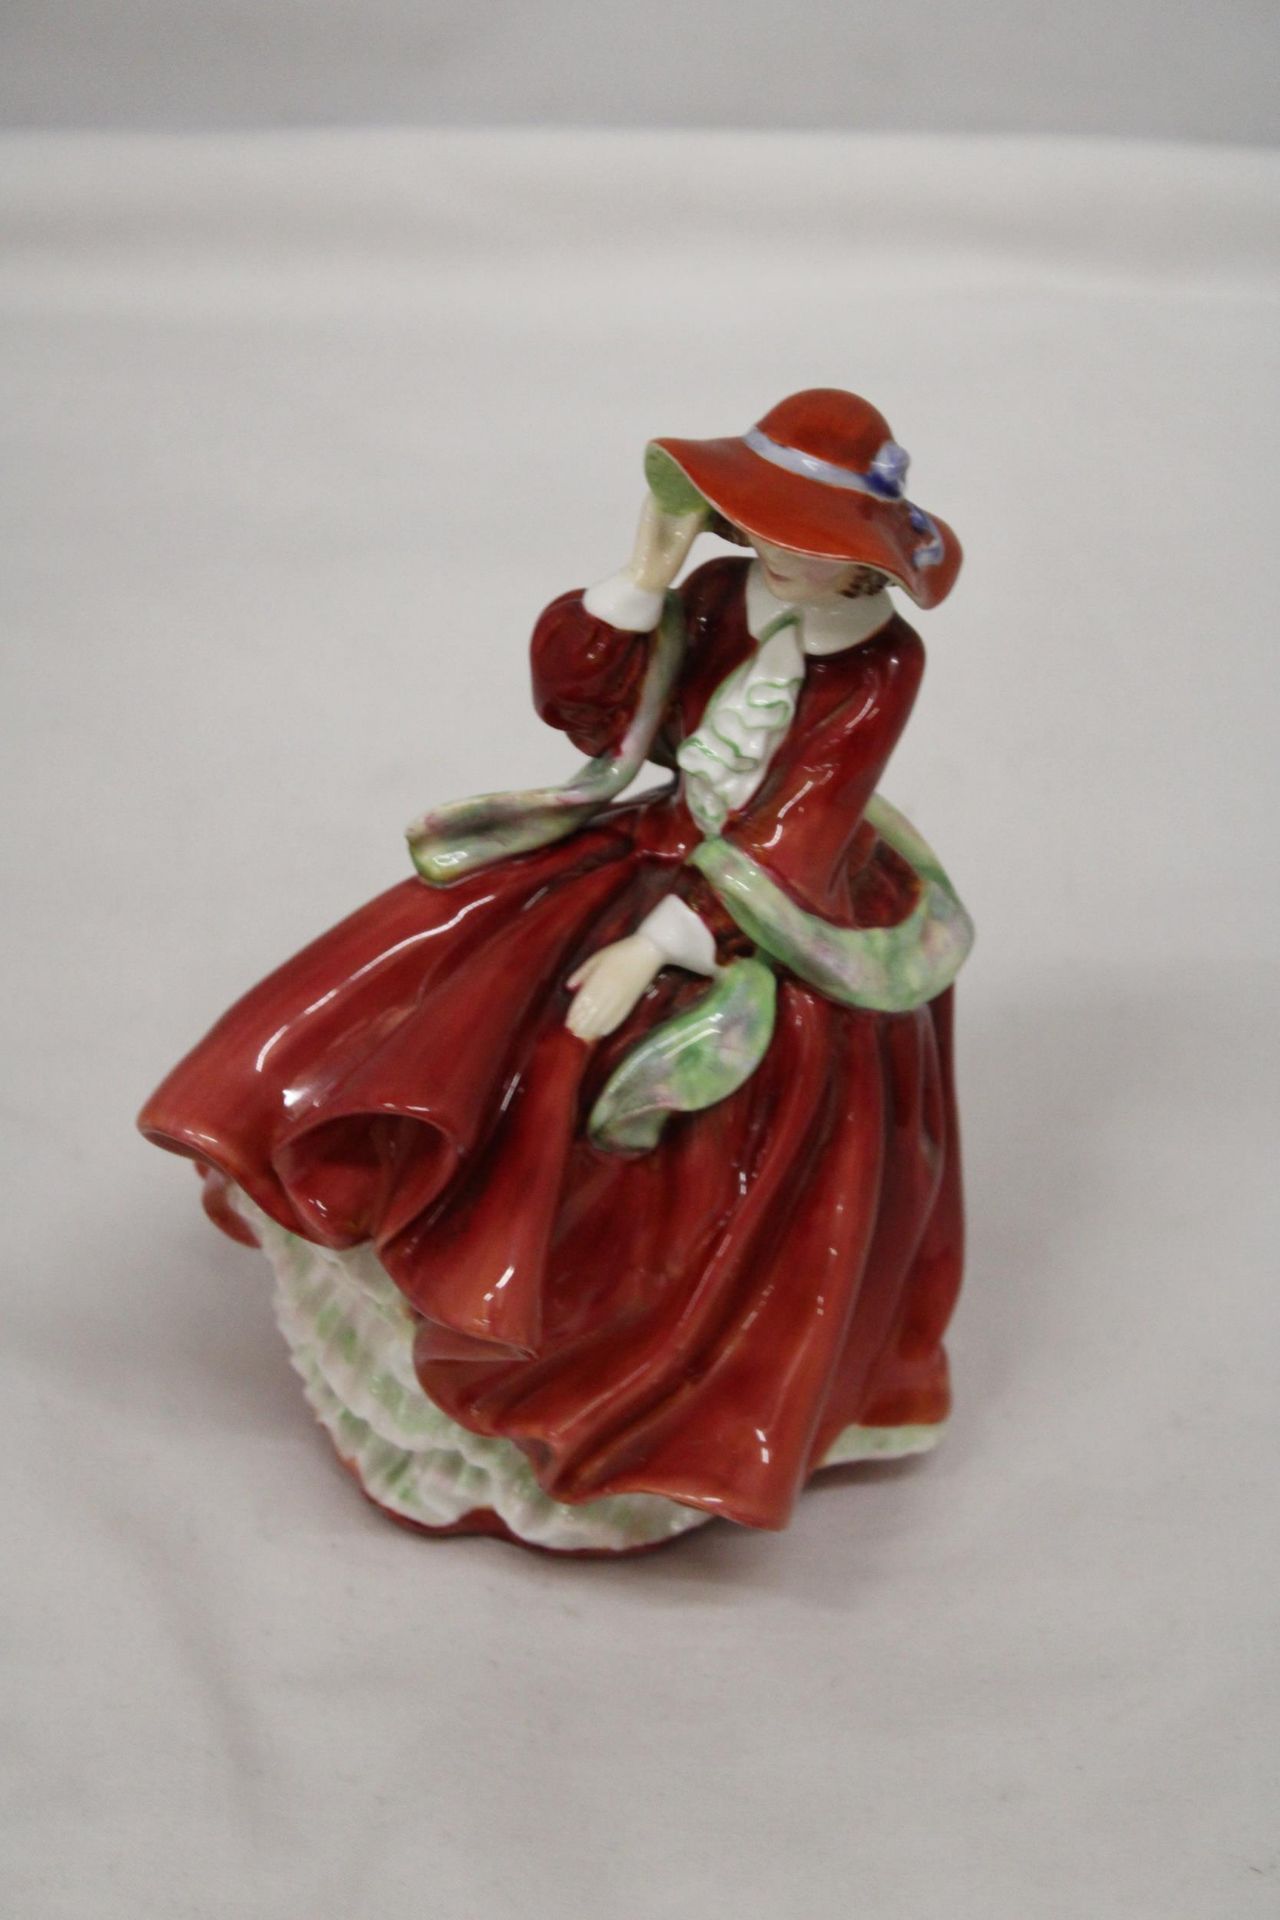 A ROYAL DOULTON FIGURE "TOP OF THE HILL" HN 1834